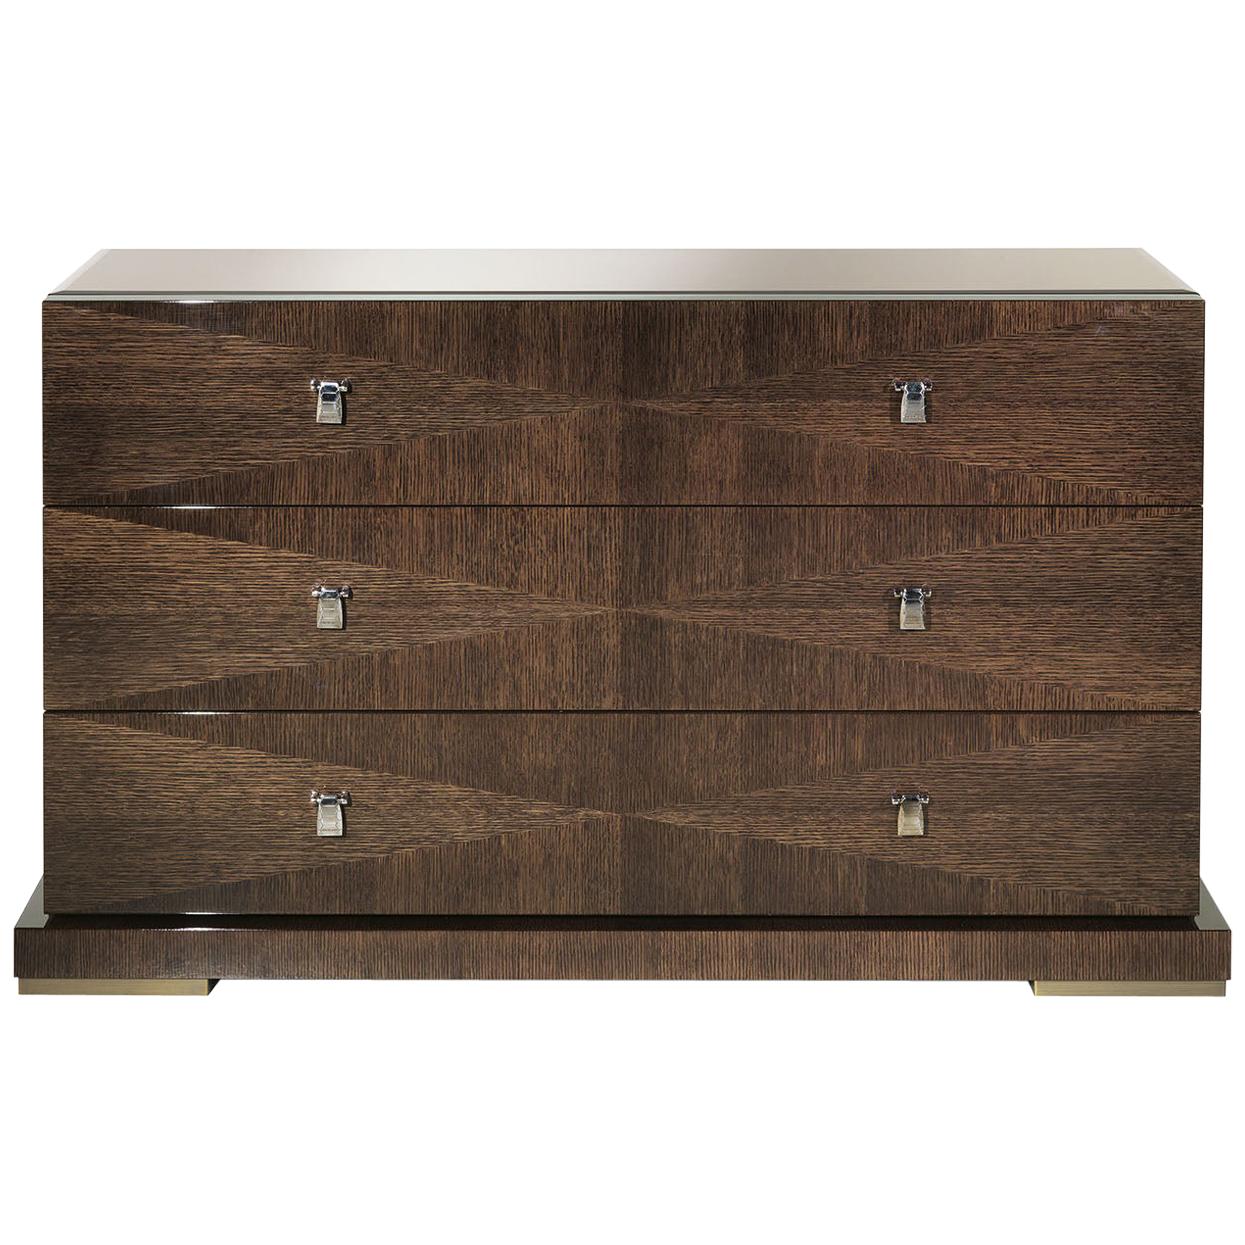 21st Century Sahara.3 Chest of Drawers in Wood by Roberto Cavalli Home Interiors